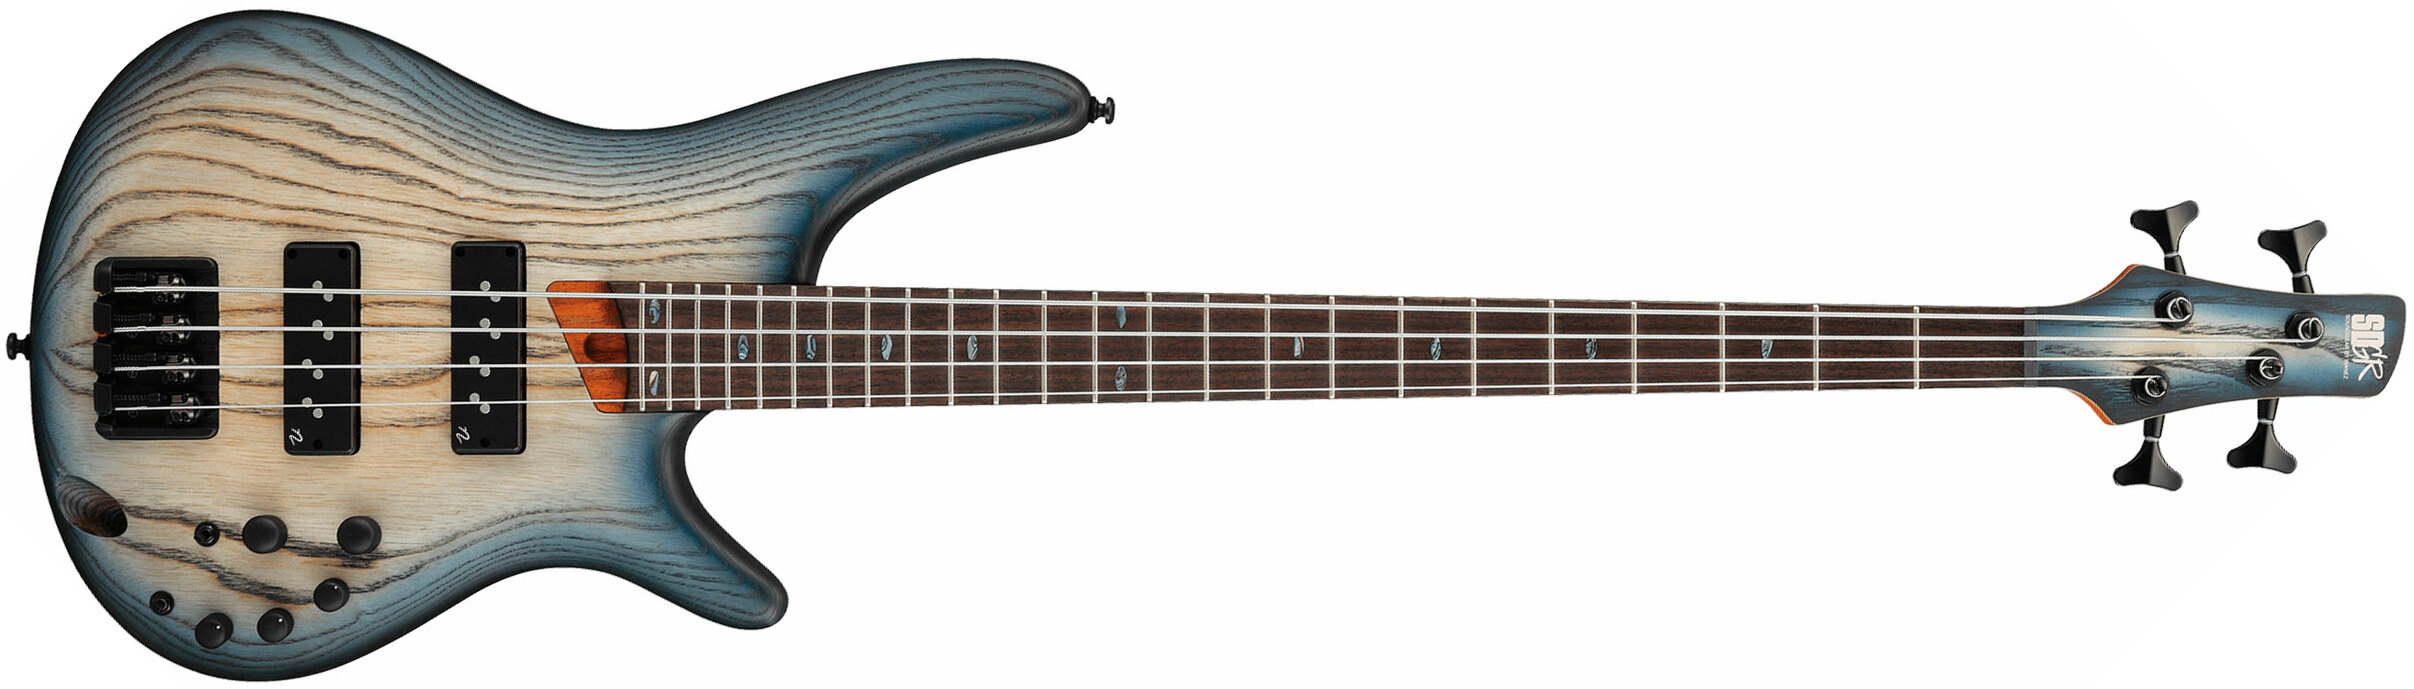 Ibanez Sr600e Ctf Standard Active Rw - Cosmic Blue Starburst Flat - Solid body electric bass - Main picture